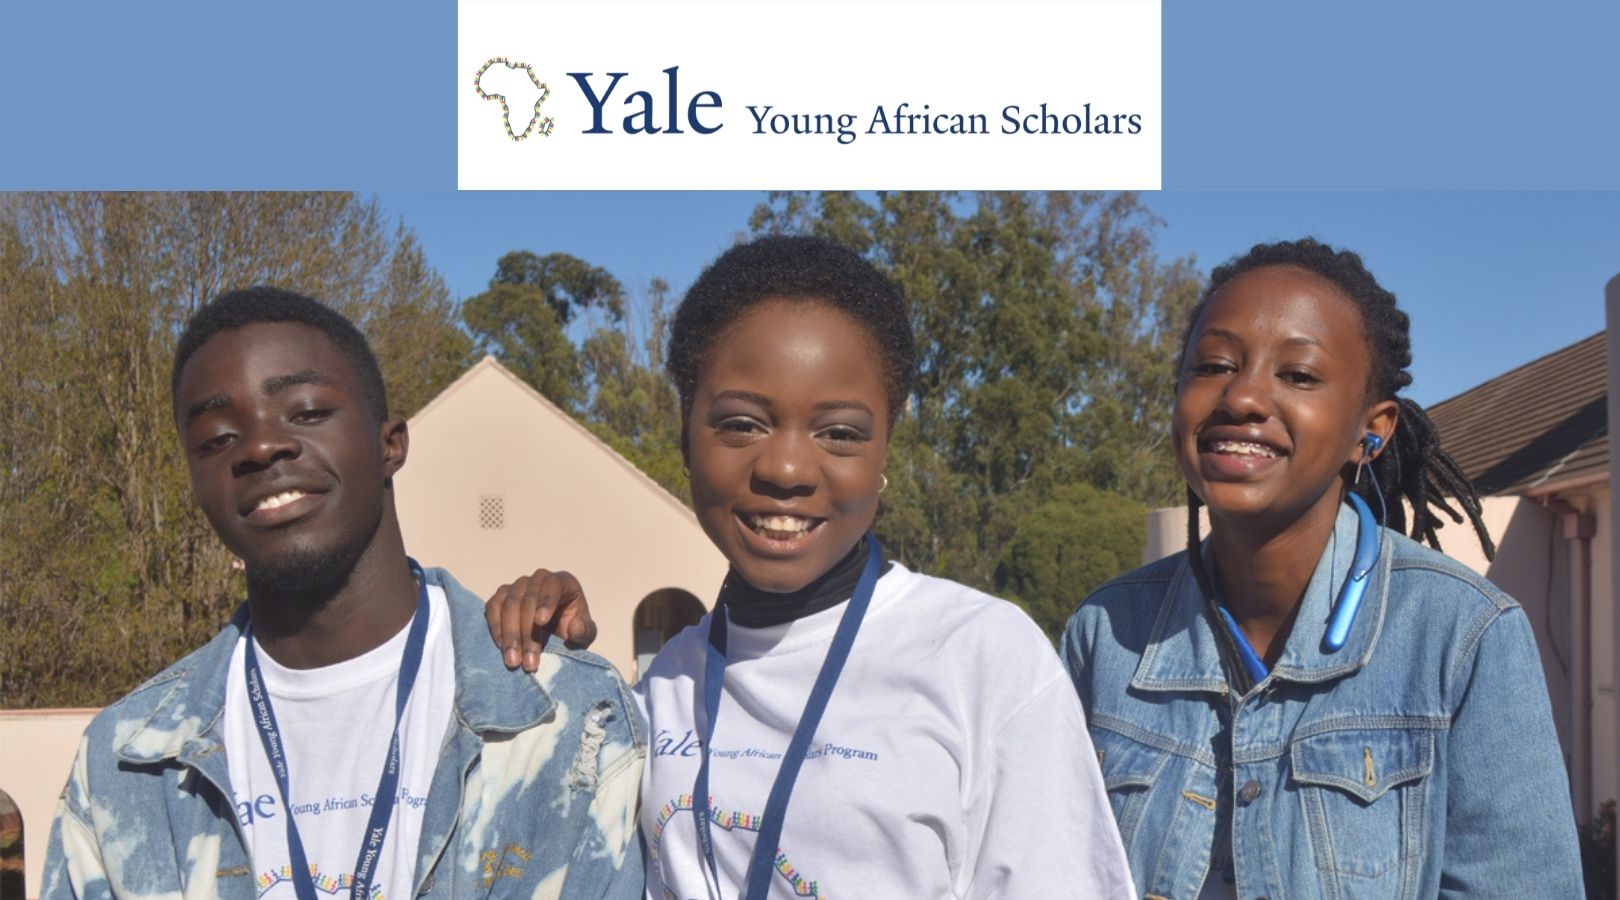 Apply for Yale Young African Scholars (YYAS) Program 2022